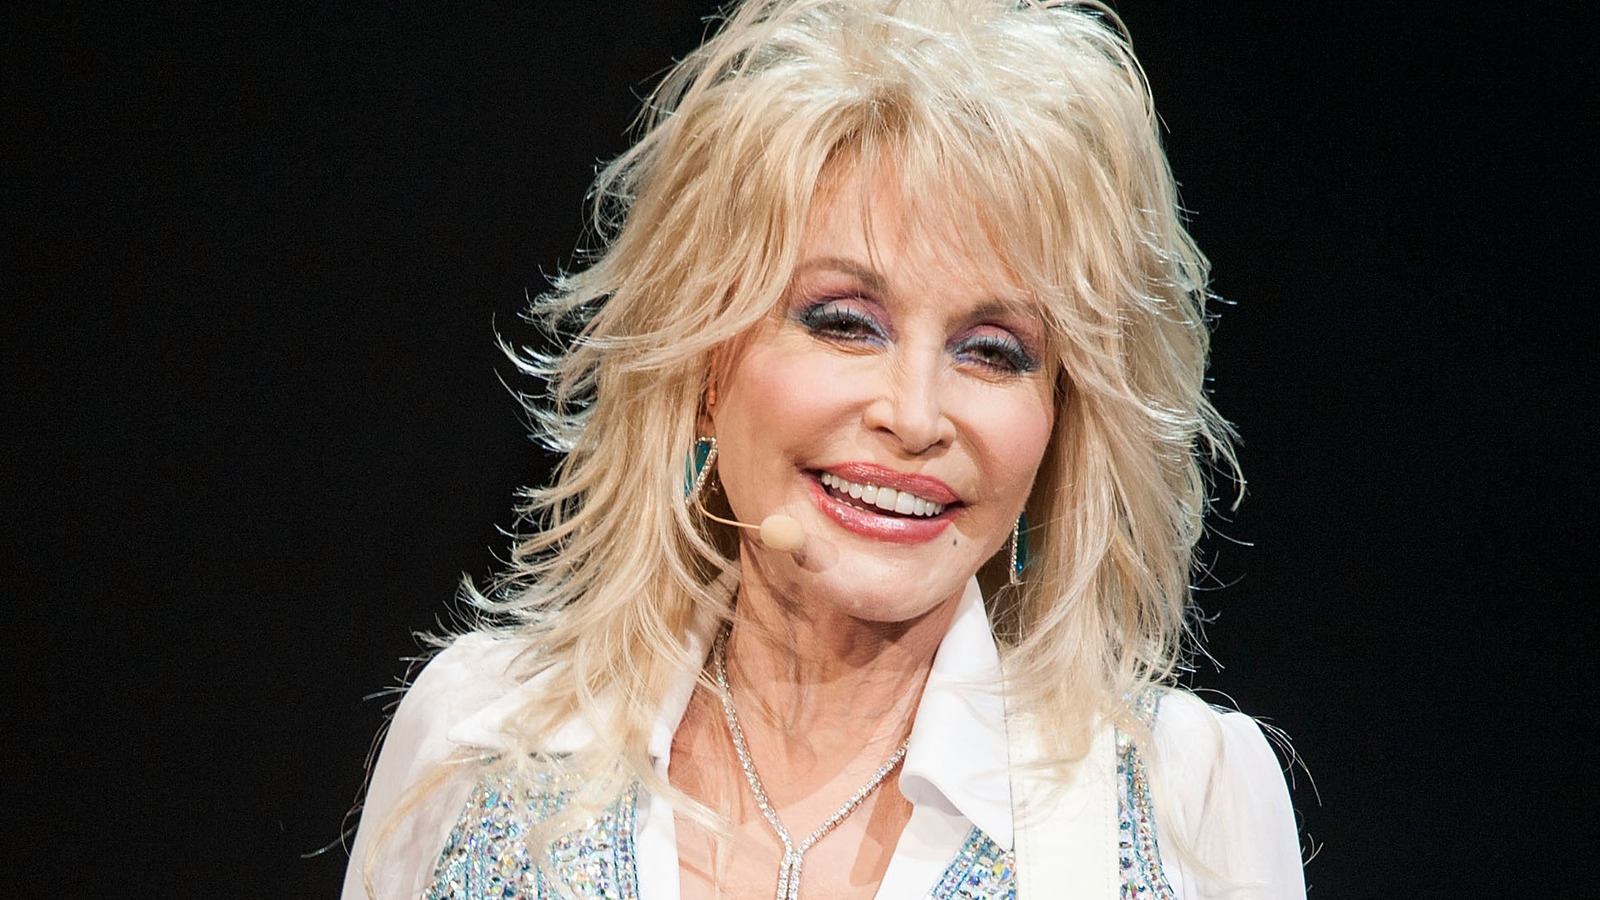 The Real Reason Dolly Parton Is Always So Optimistic